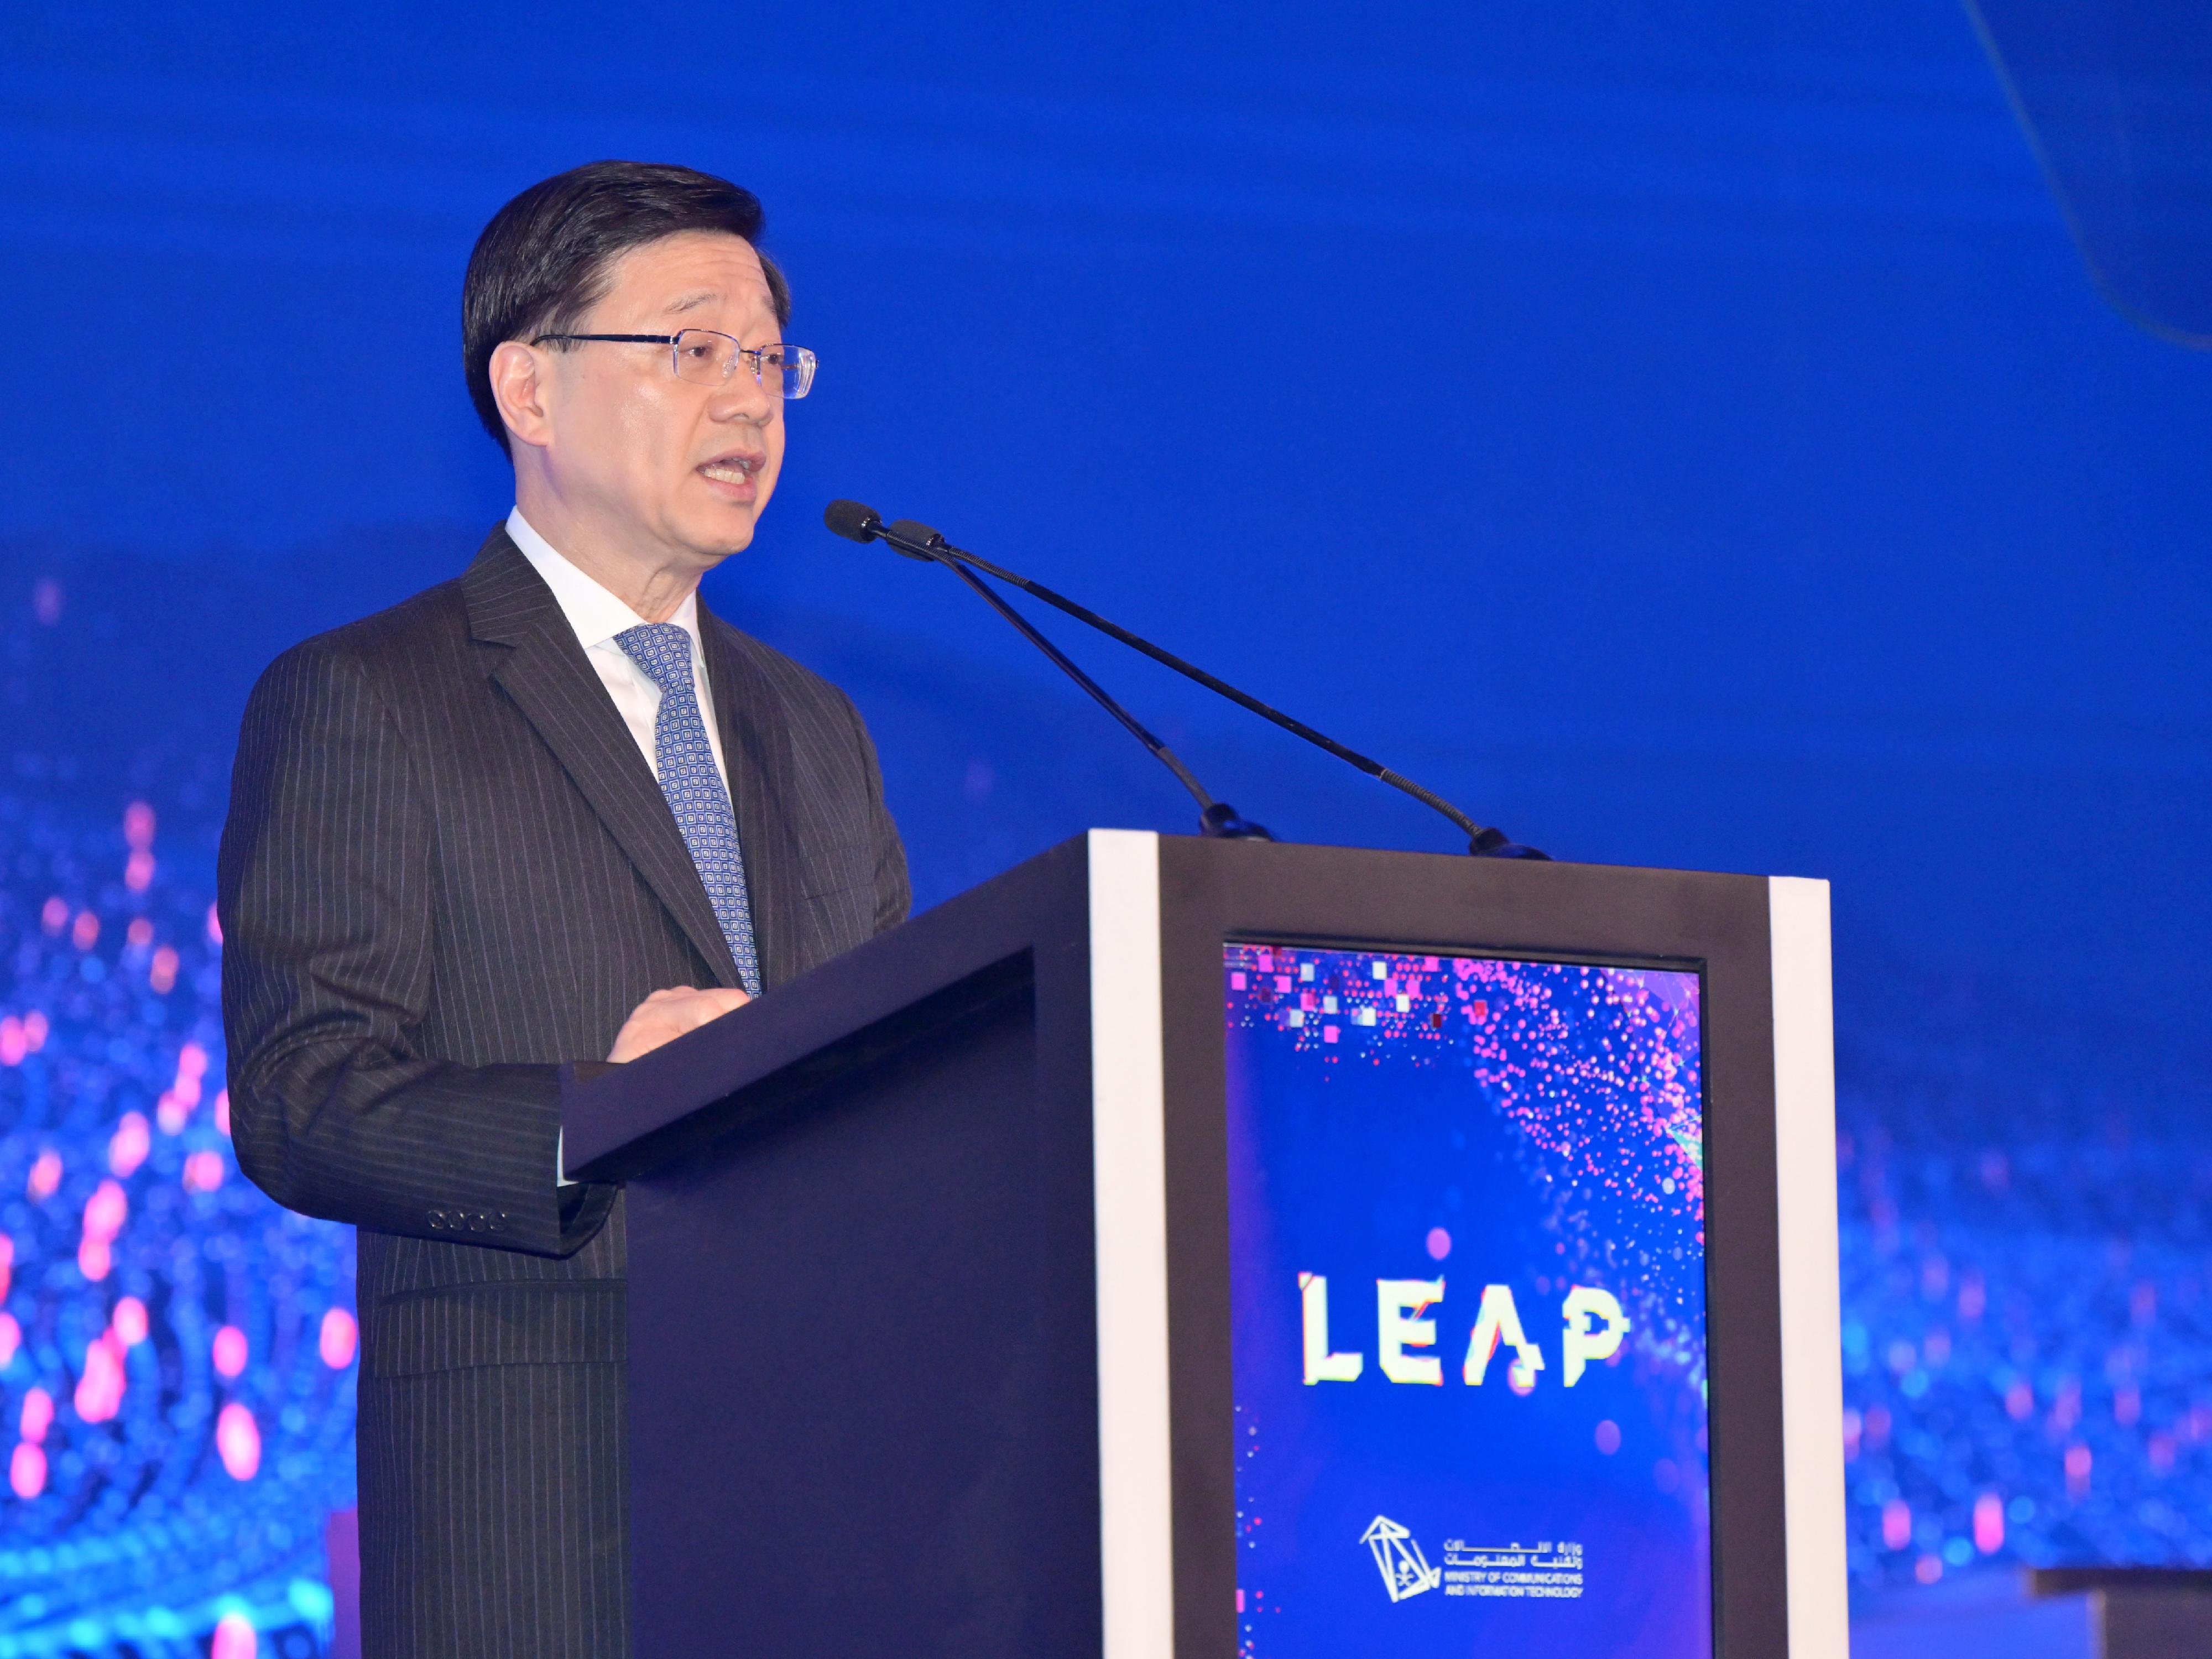 The Chief Executive, Mr John Lee, in Riyadh, Saudi Arabia, today (February 6, Riyadh time) attended the LEAP 2023 technology conference. Photo shows Mr Lee delivering a keynote speech at the event.